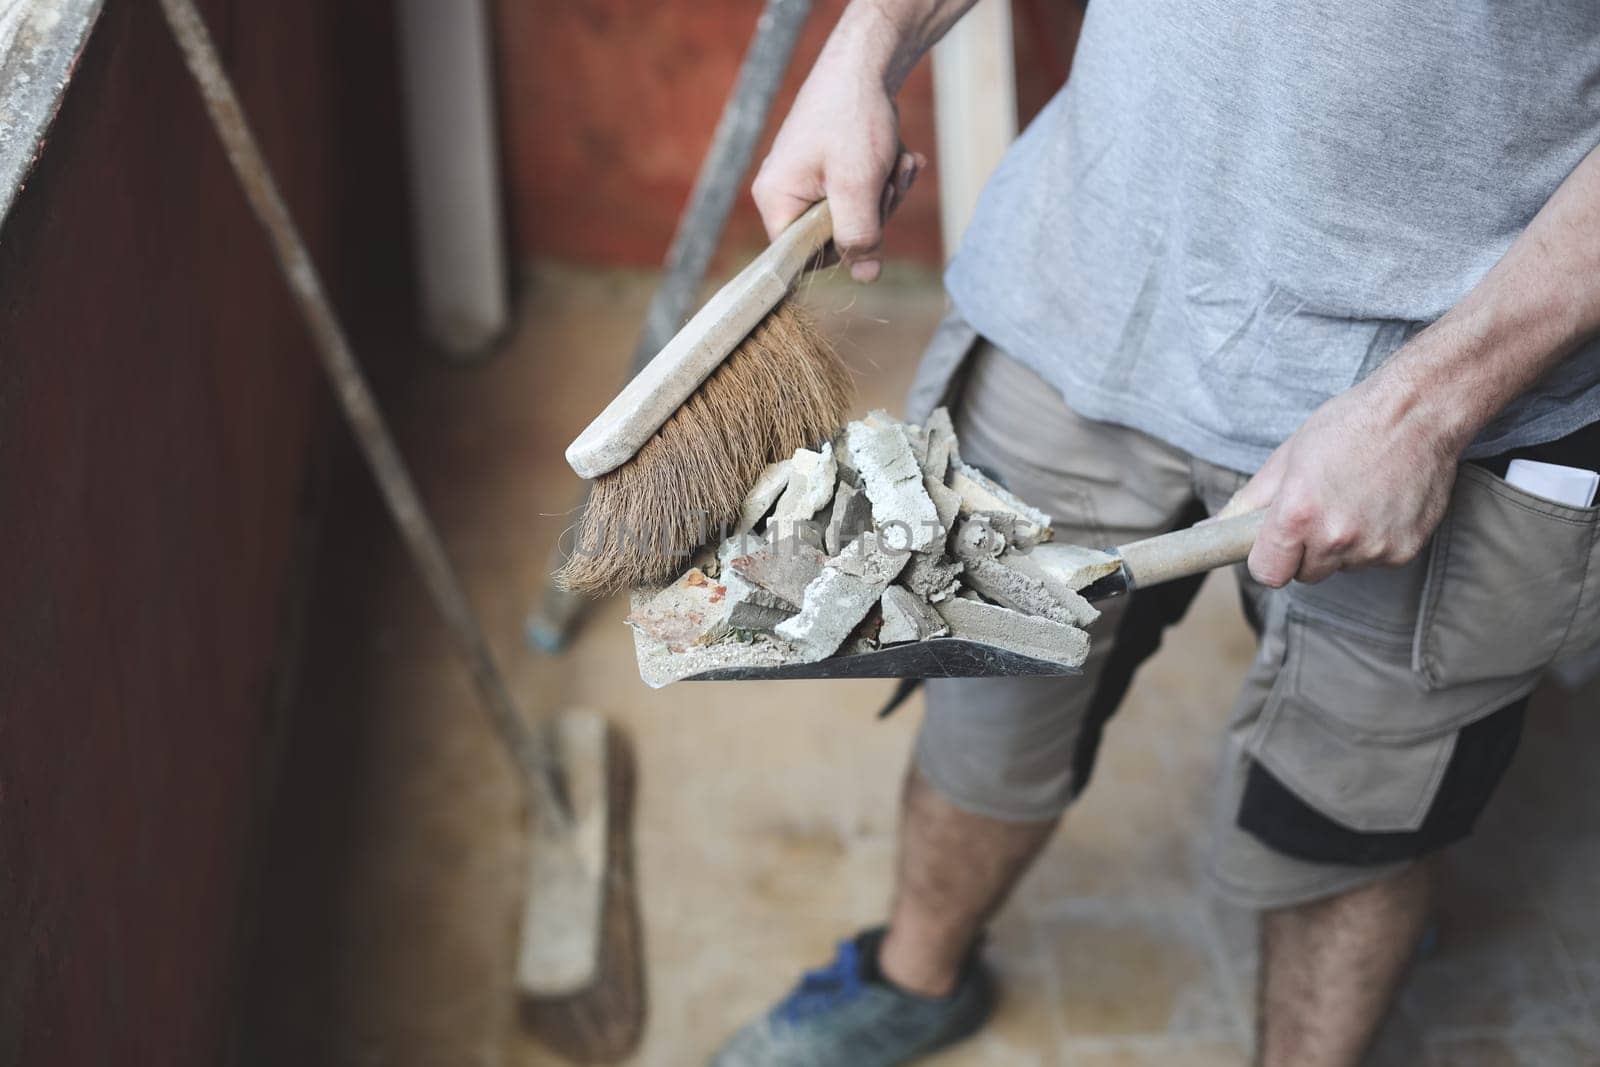 Young caucasian unrecognizable man holding a small broom of construction debris on an old shovel, close-up side view. The concept of cleaning and installing windows, construction work, home renovation.